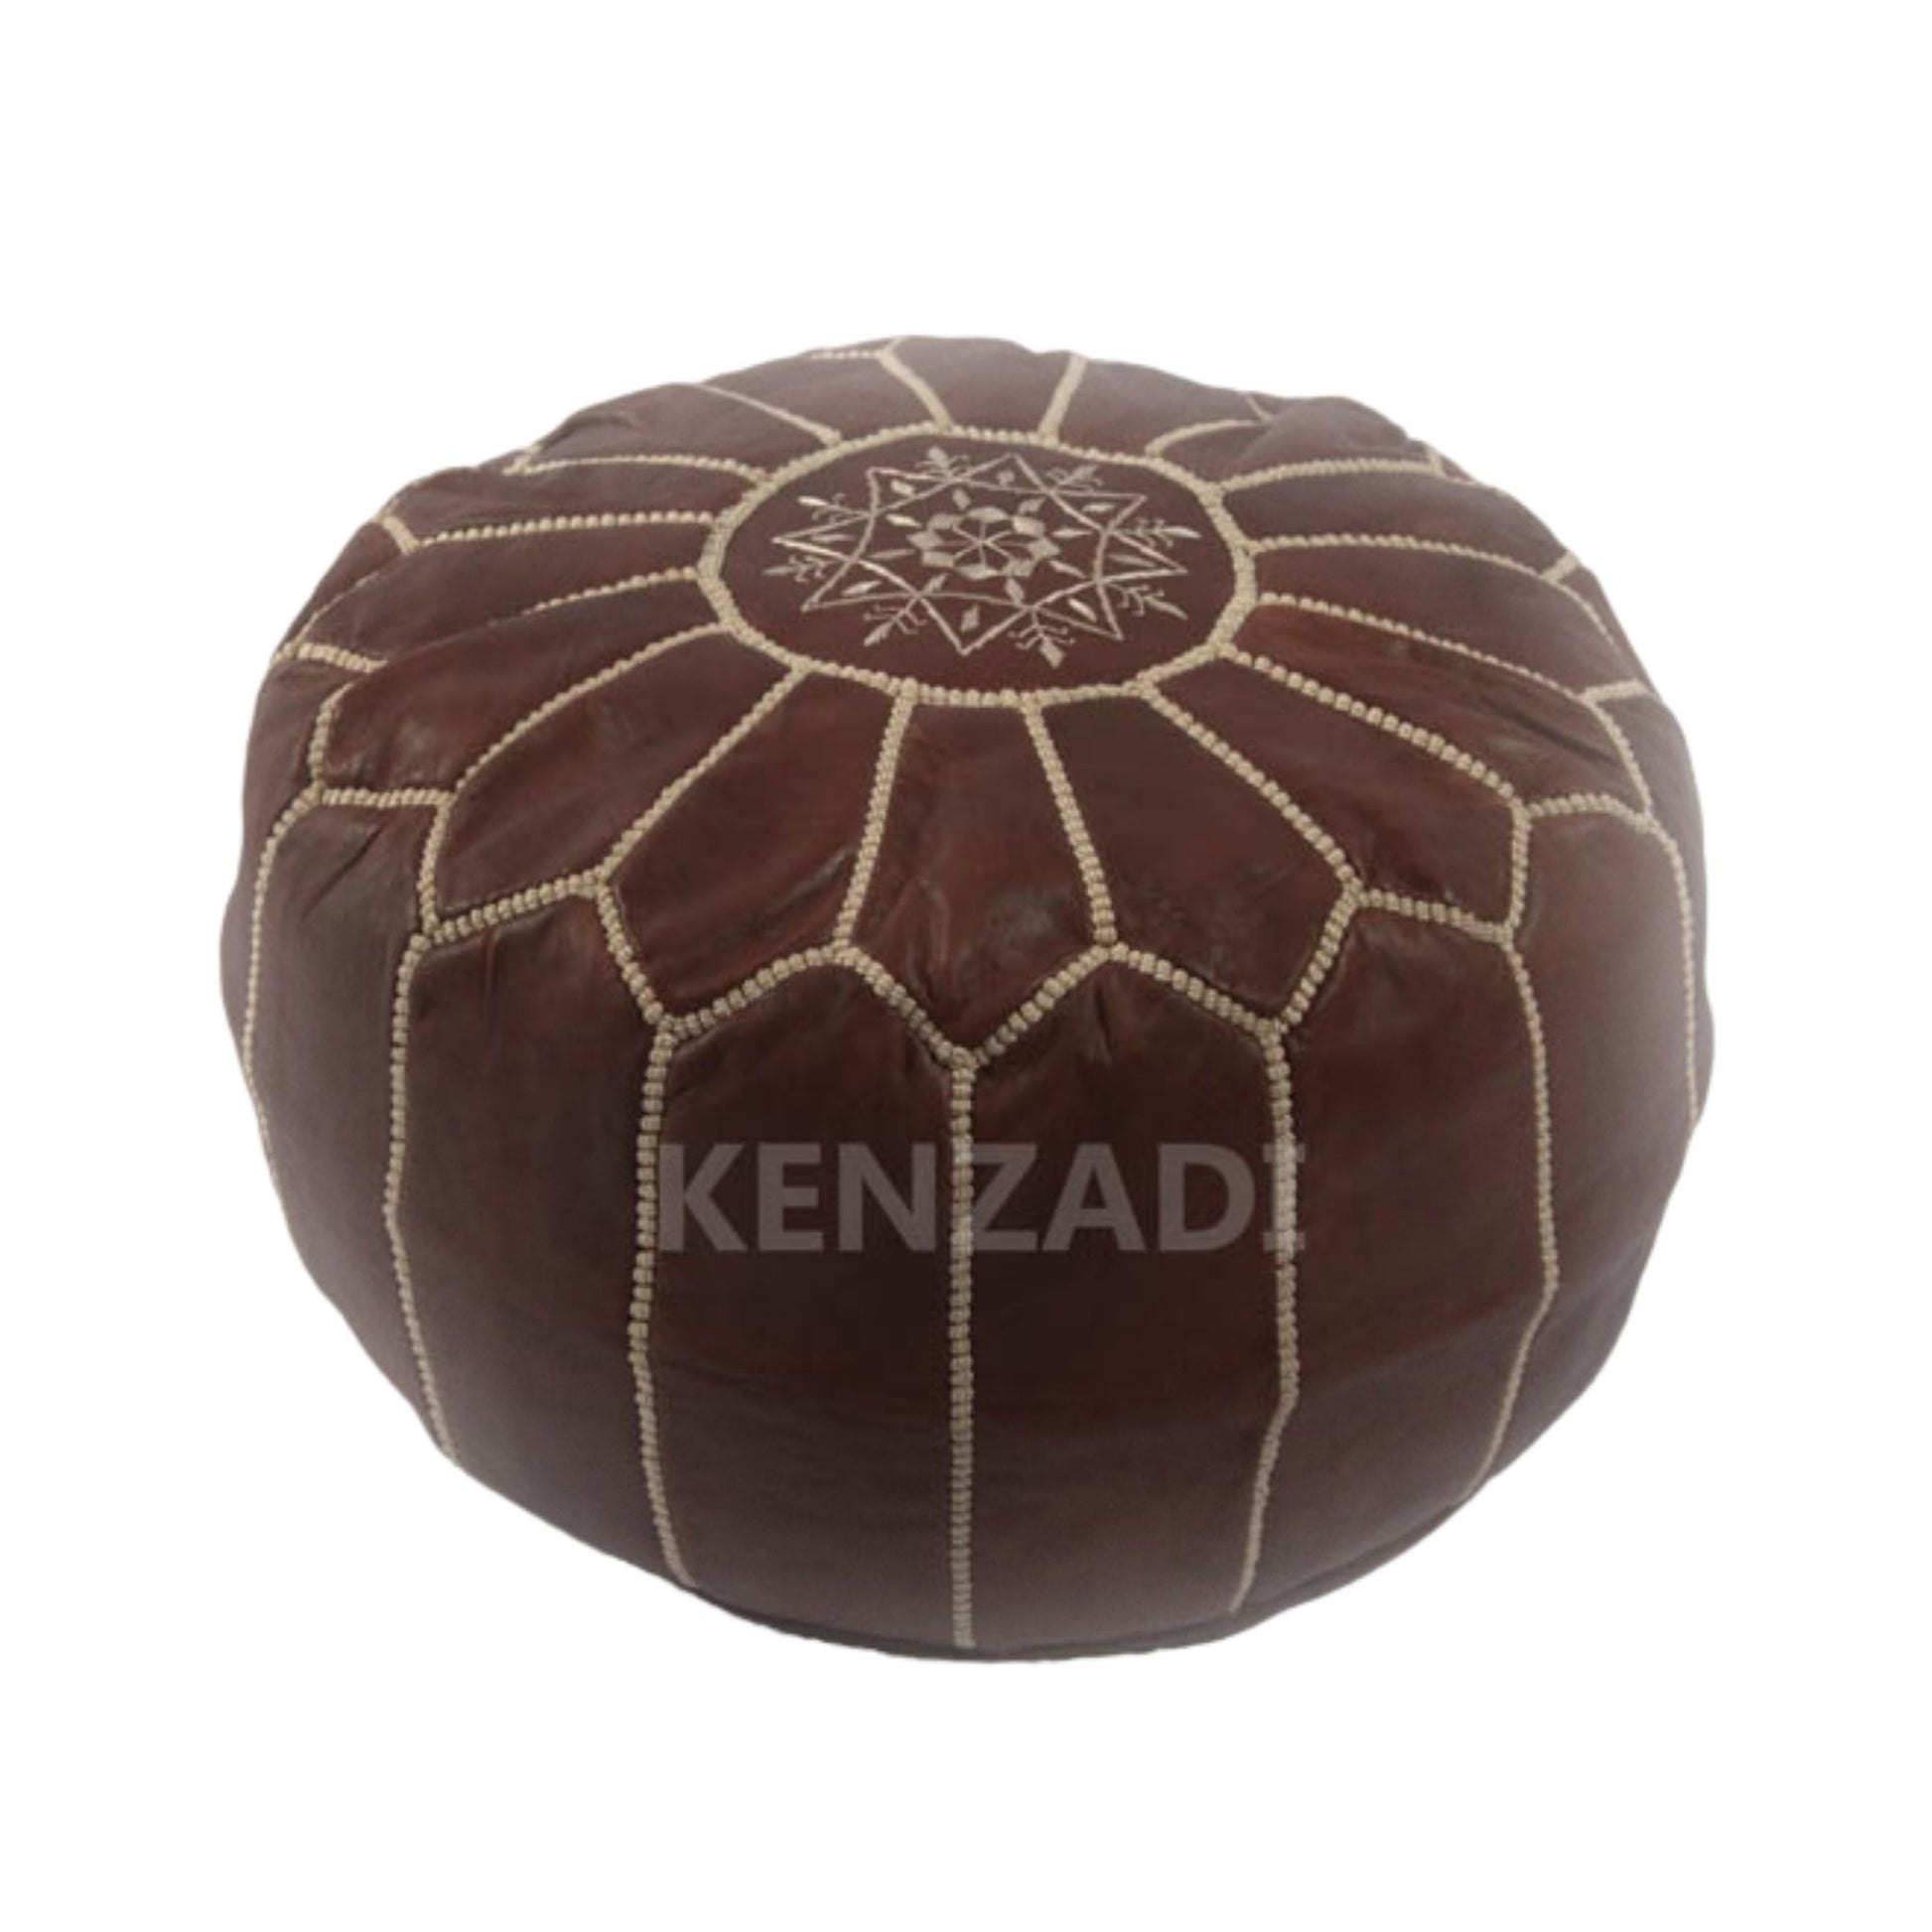 Moroccan leather pouf, round pouf, berber pouf, Redwood pouf with Beige embroidery by Kenzadi - Handmade by My Poufs